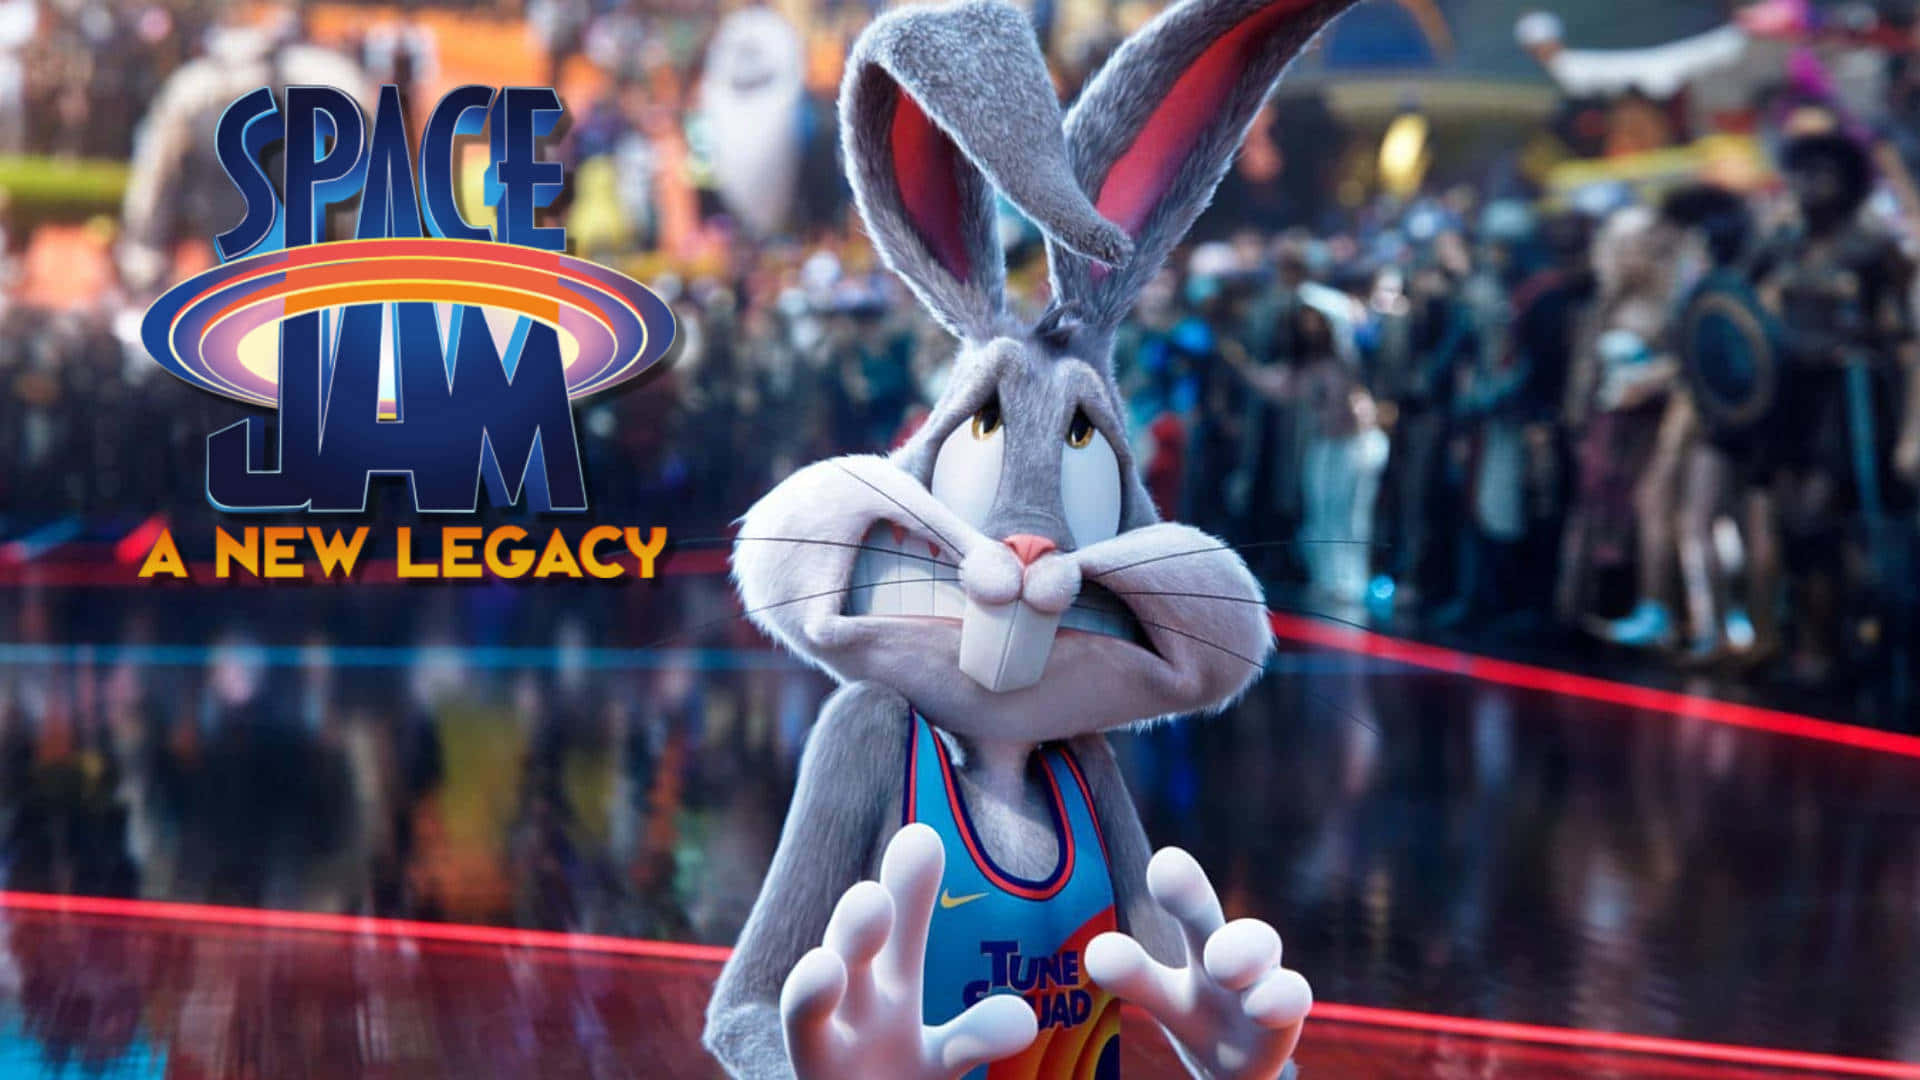 Bugs Bunny Cool Space Jam A New Legacy Wallpaper